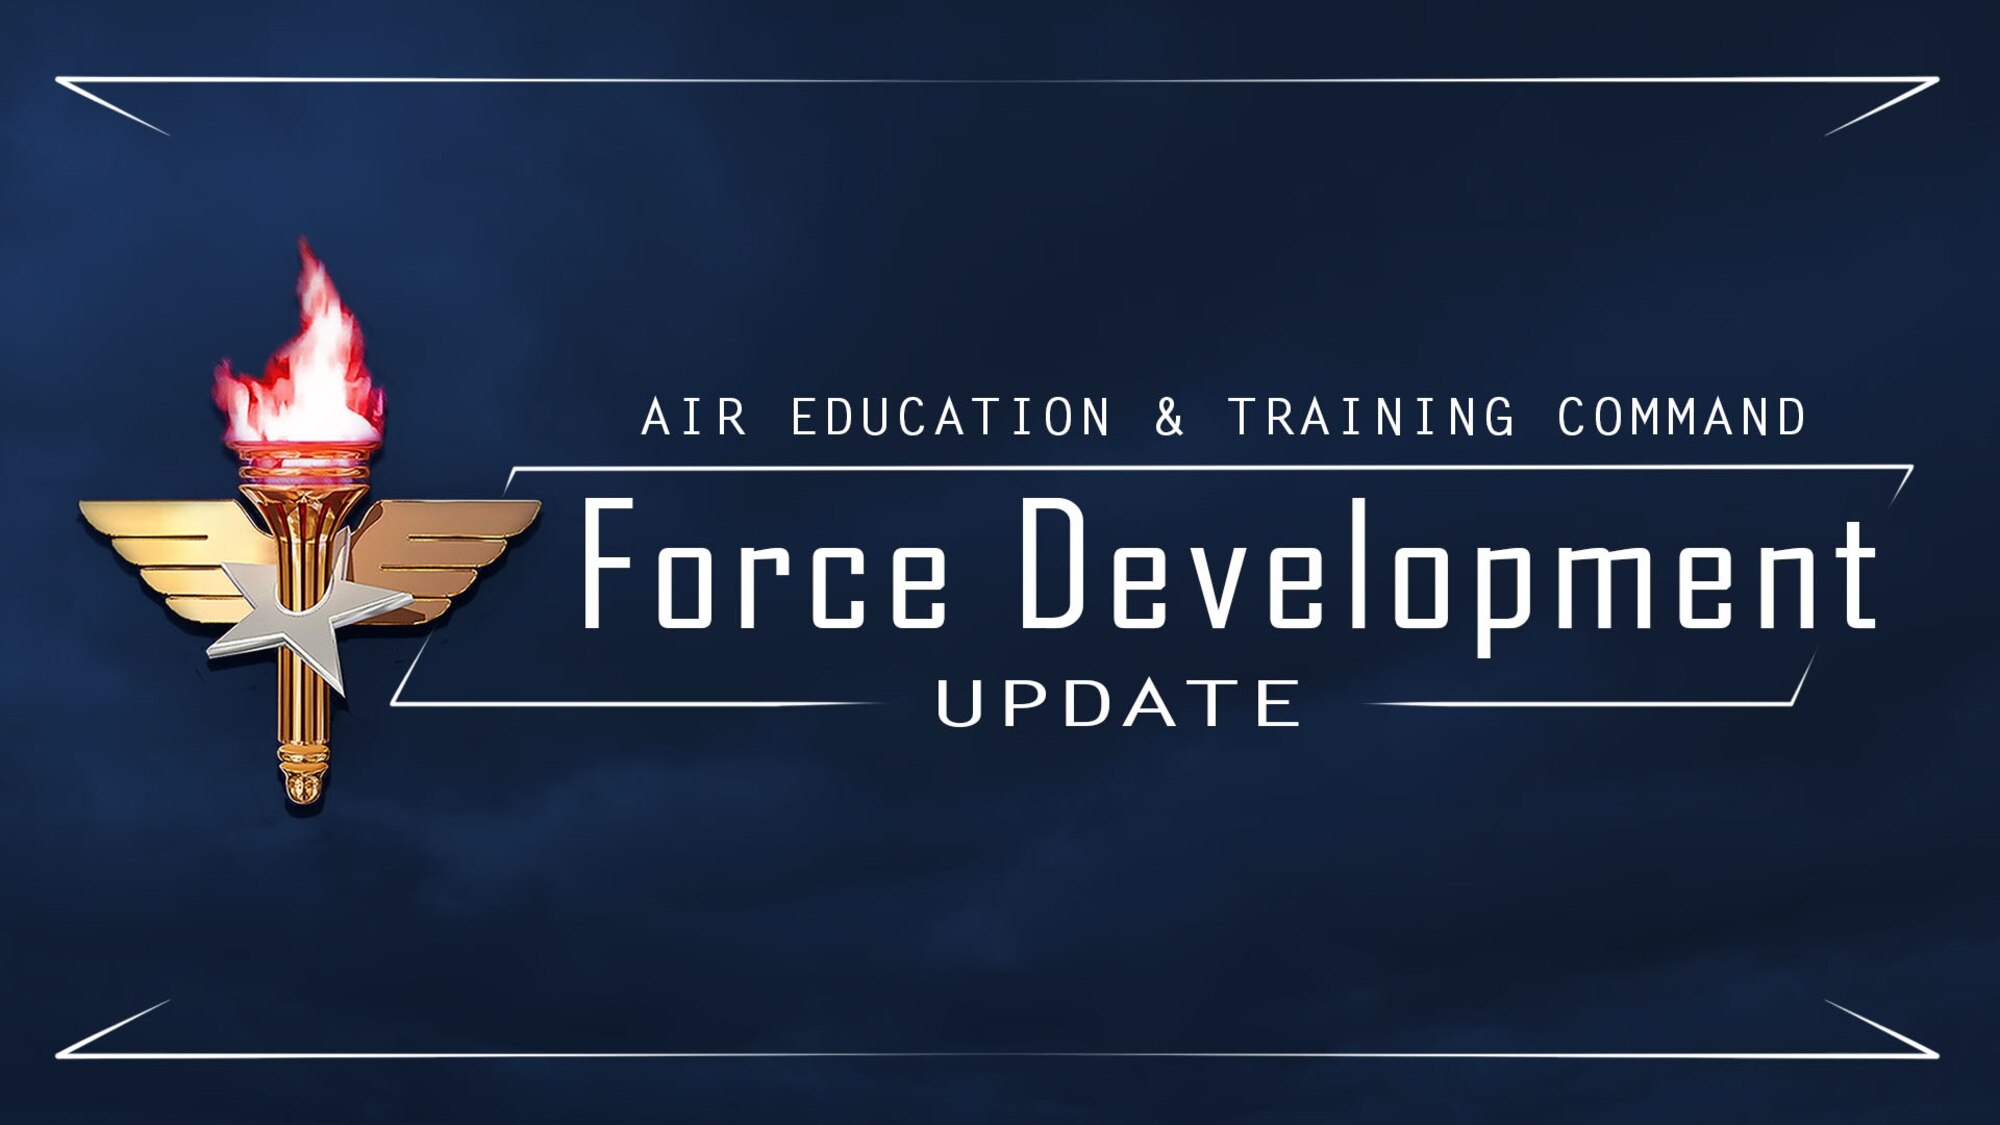 Force Development is a deliberate process of preparing Airmen through the Continuum of Learning with the required competencies to meet the challenges of the 21st Century.